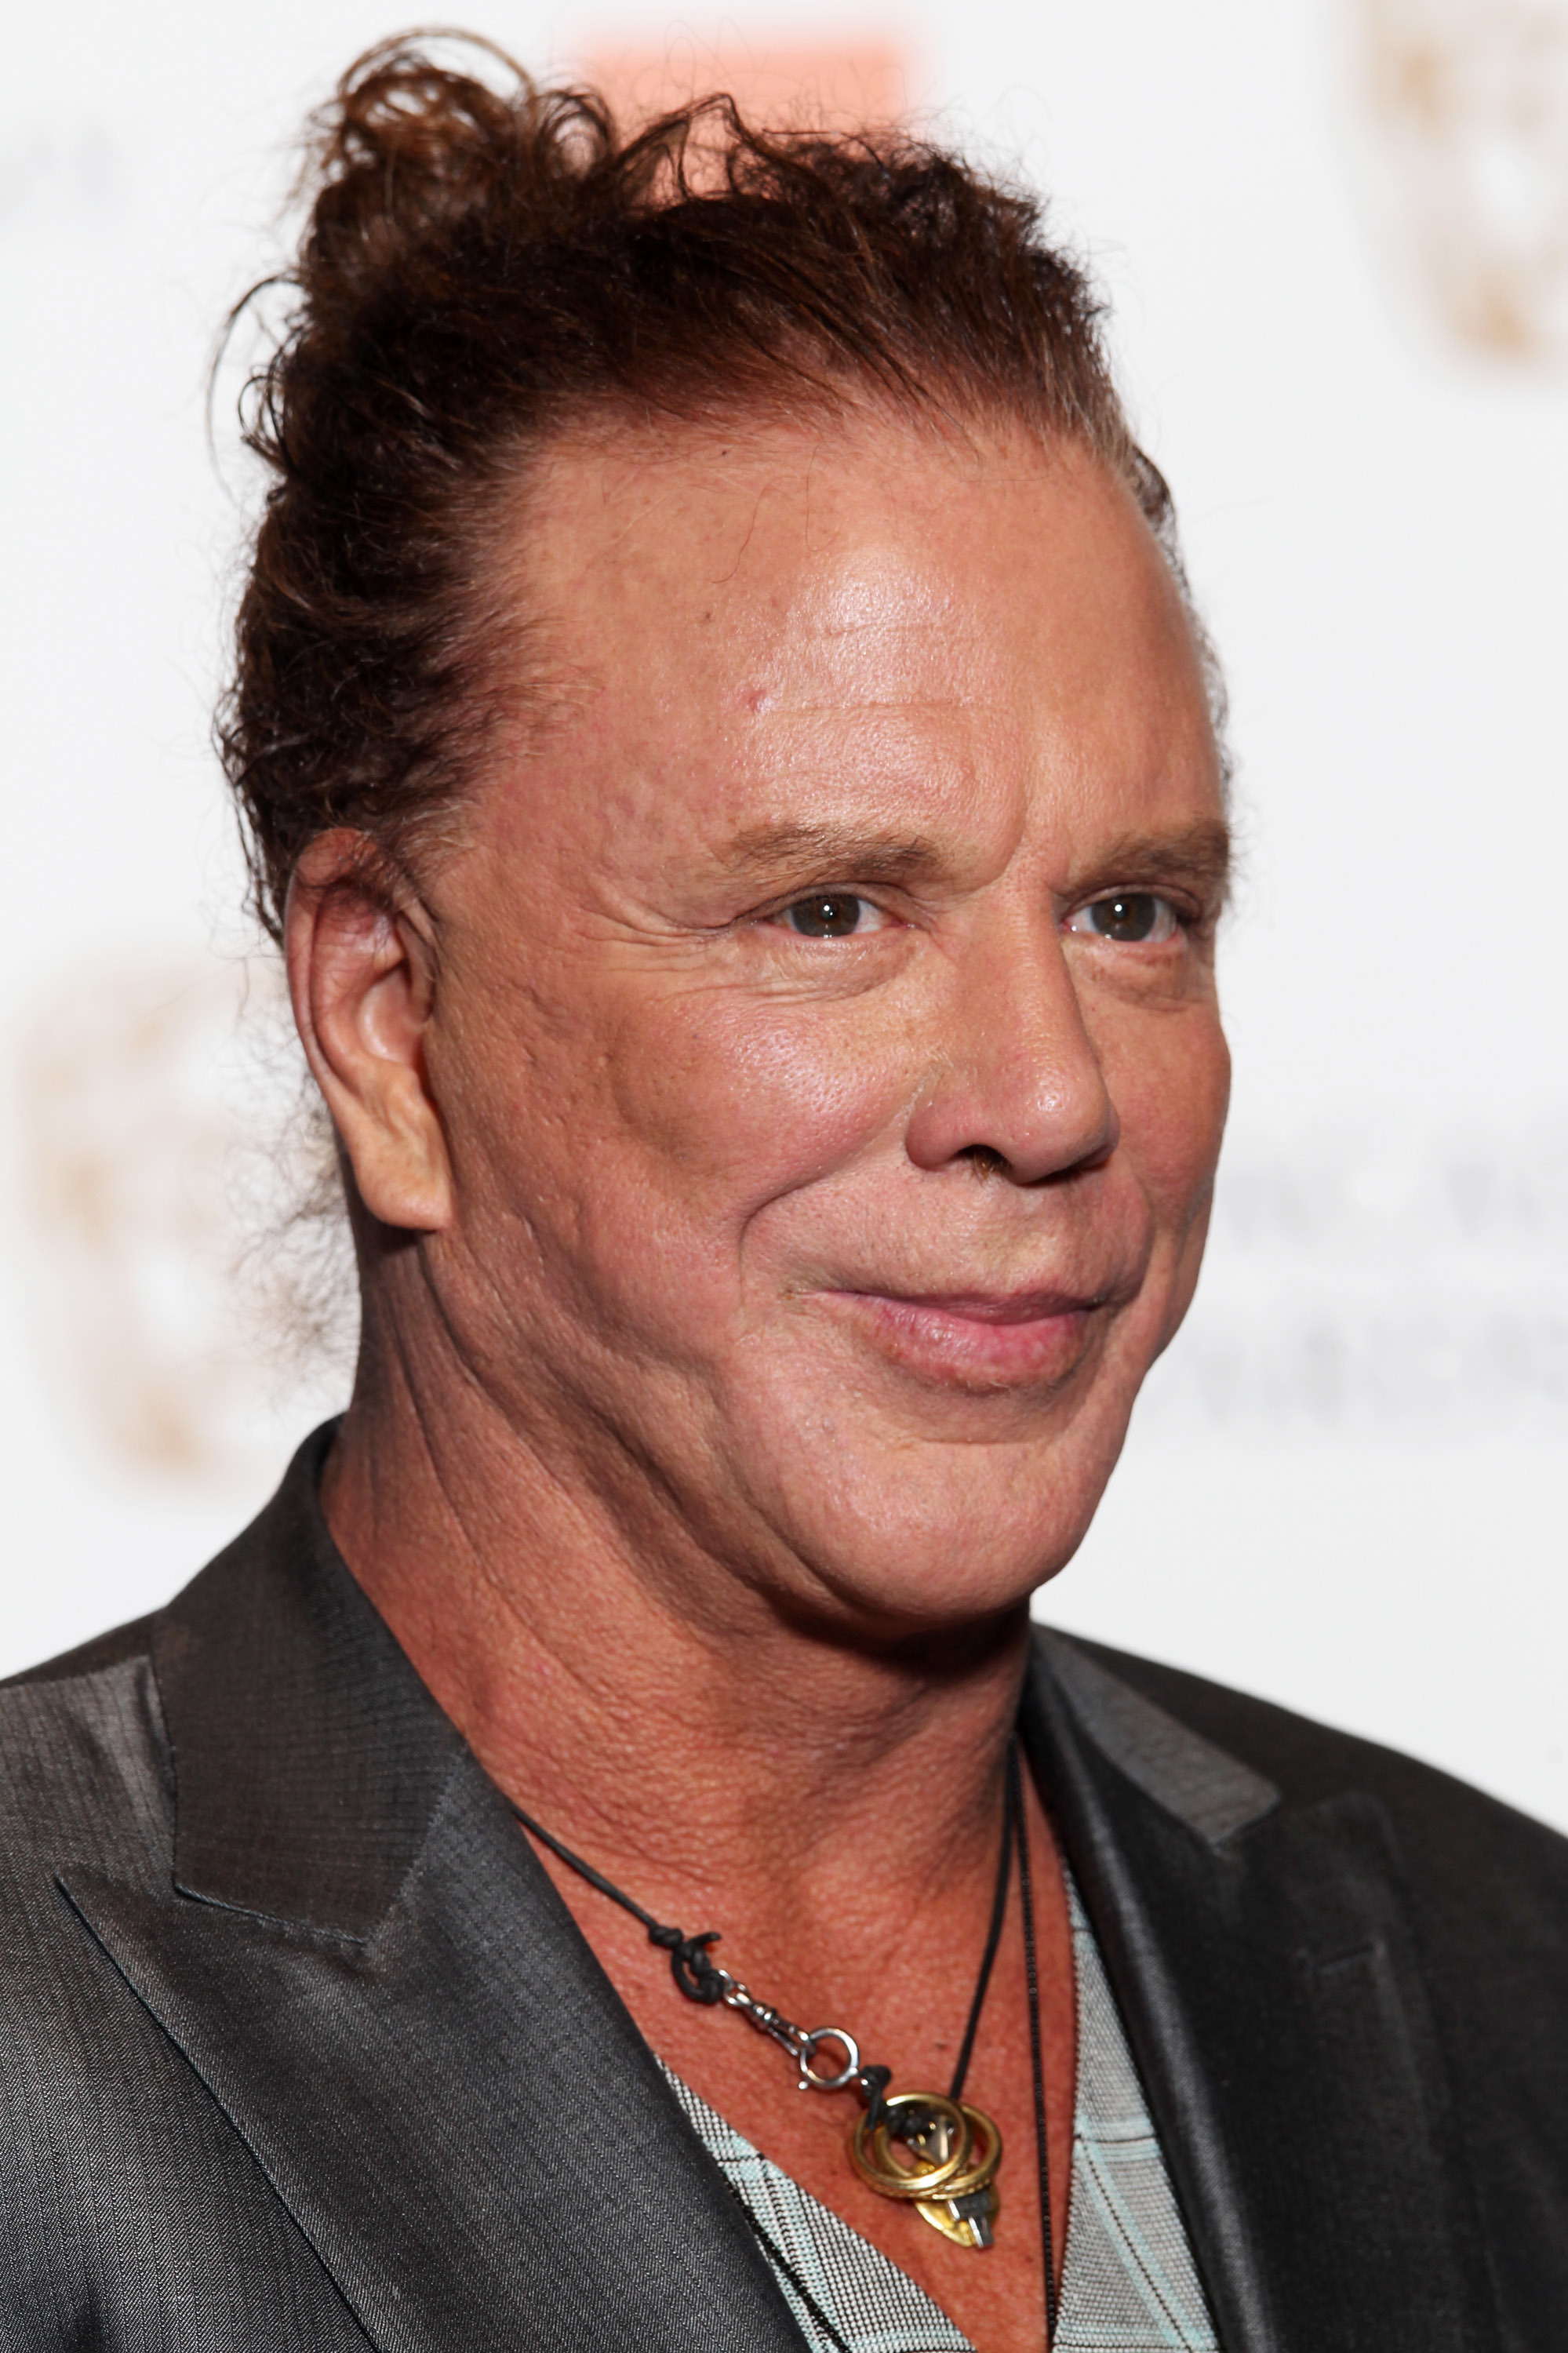 <p>Mickey Rourke (seen here in 2010) went under the knife to get reconstructive surgery after his face was badly damaged during his stint as a boxer. Unfortunately, he went to the wrong doctor. "Most of it was to mend the mess of my face because of the boxing, but I went to the wrong guy to put my face back together," he told MailOnline in 2009. "I had my nose broken twice. I had five operations on my nose and one on a smashed cheekbone."</p>